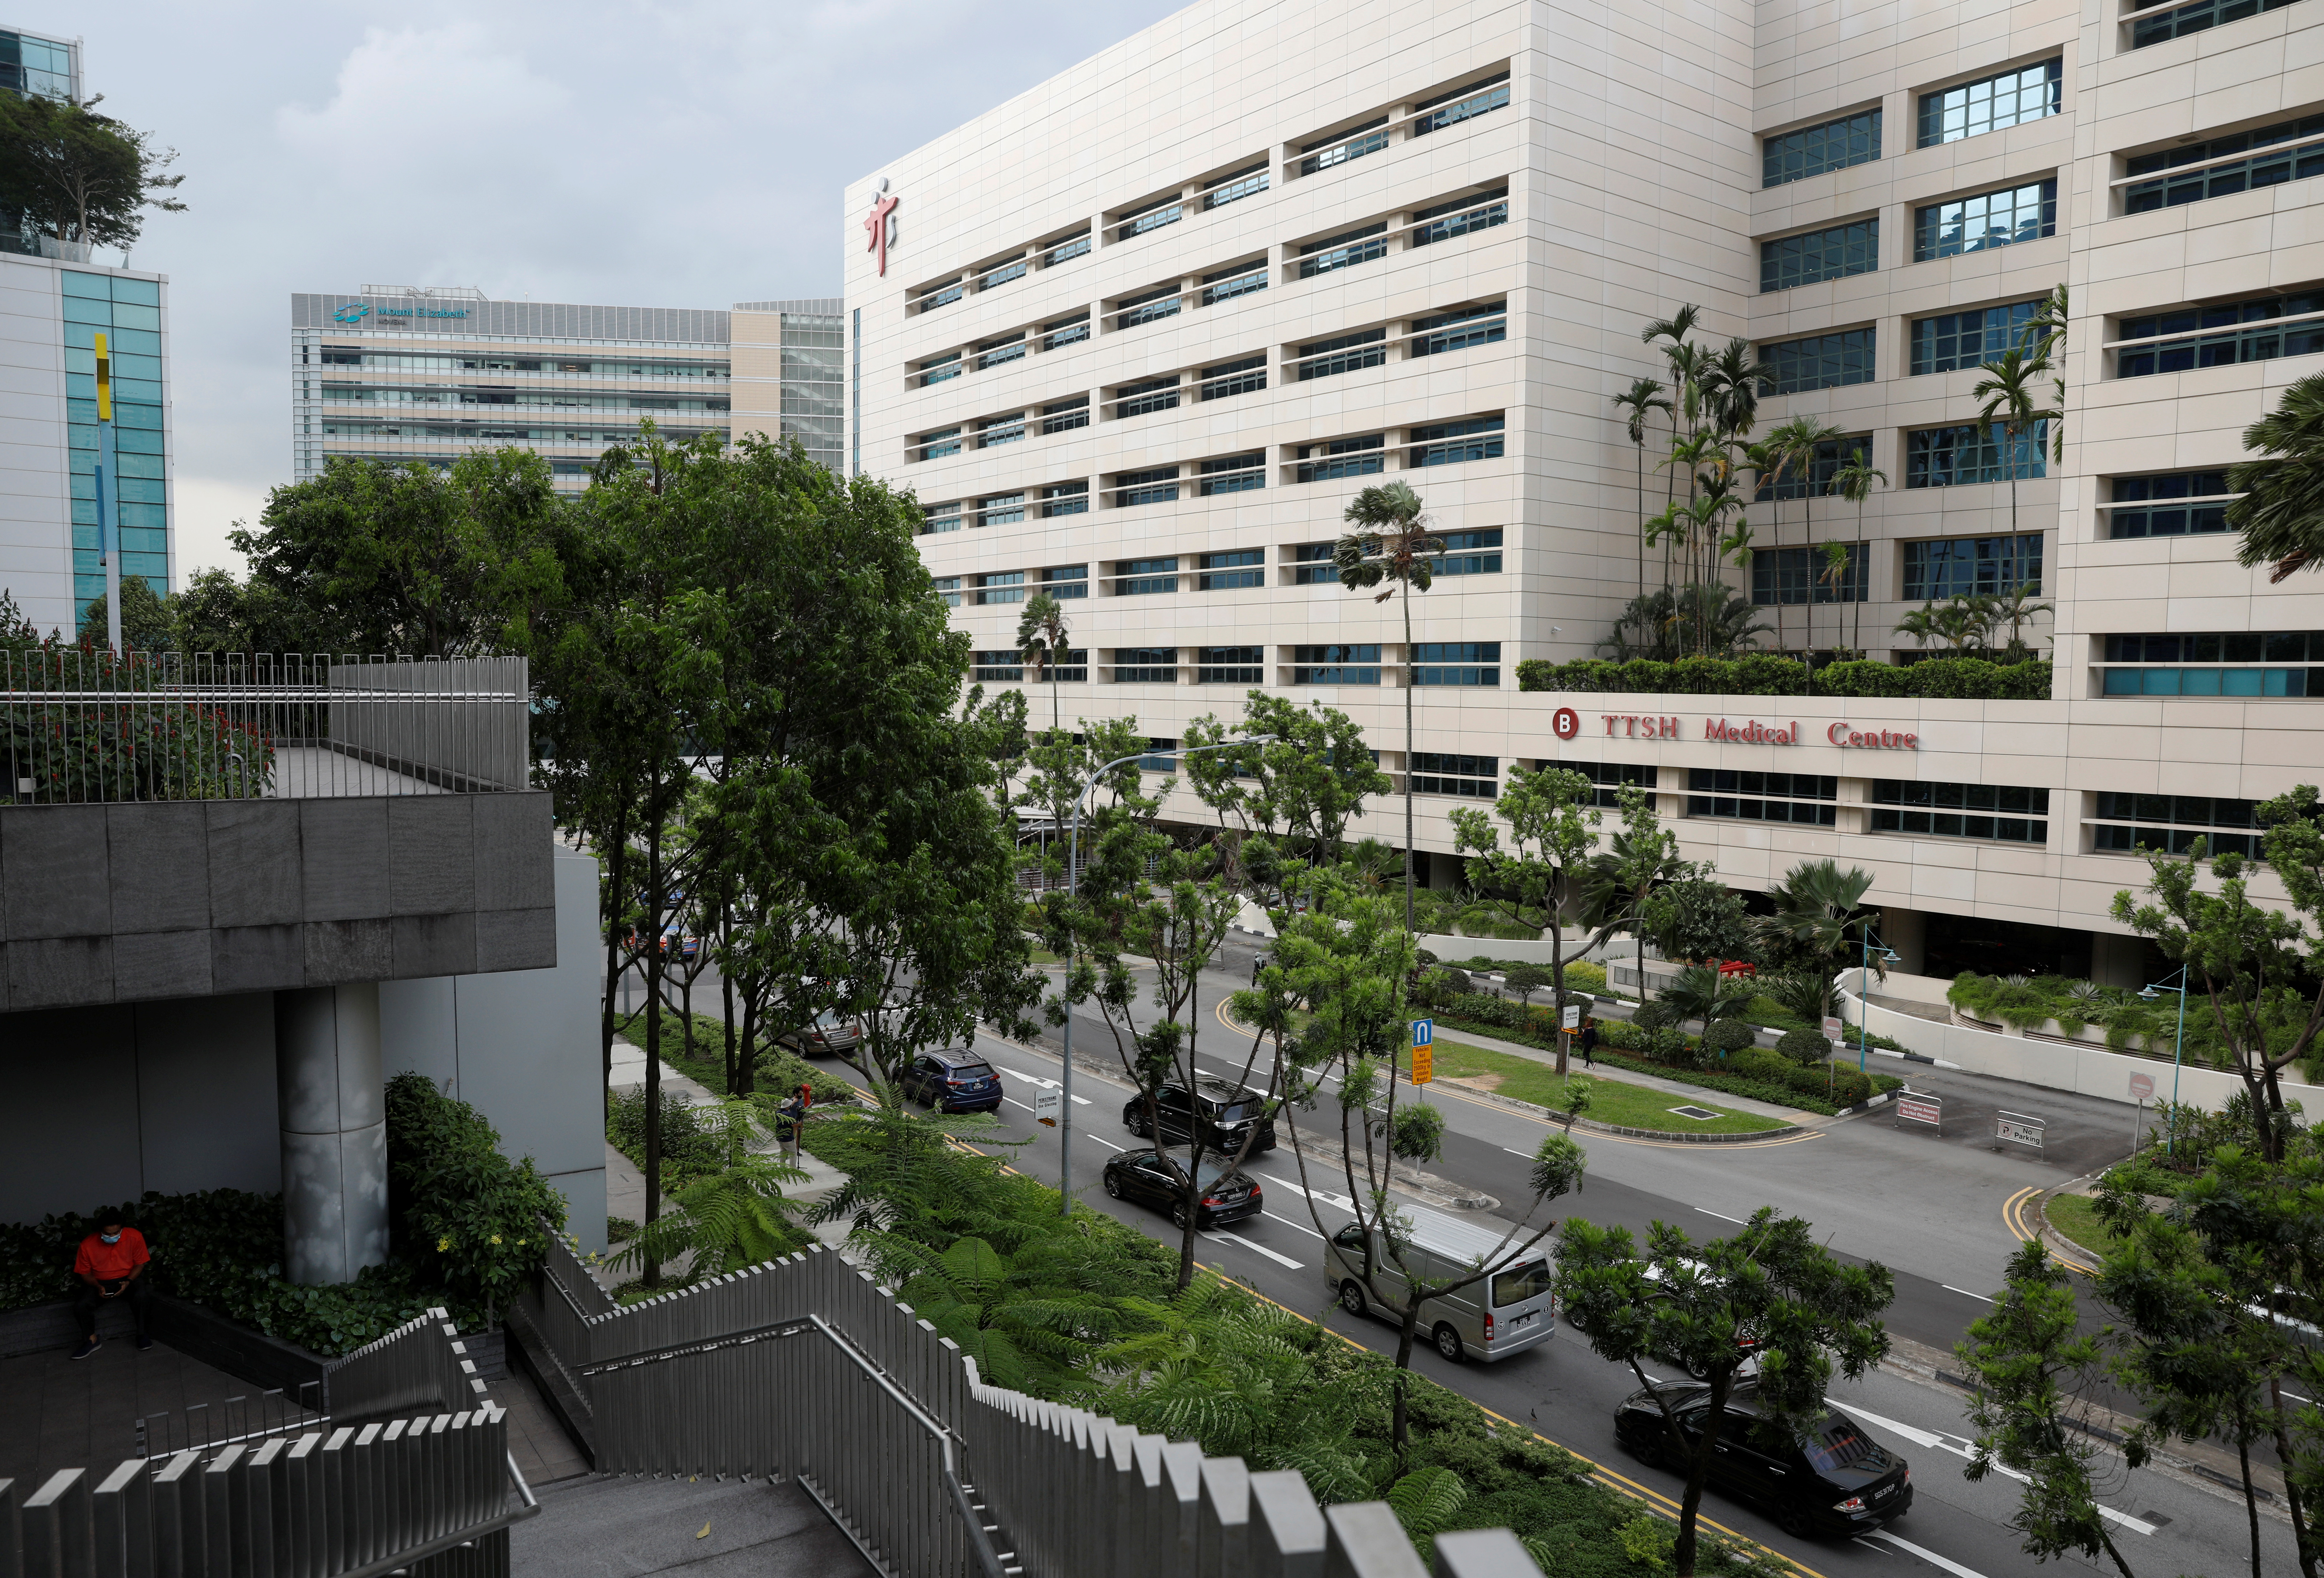 A view of Tan Tock Seng Hospital, which became a coronavirus disease (COVID-19) cluster, in Singapore